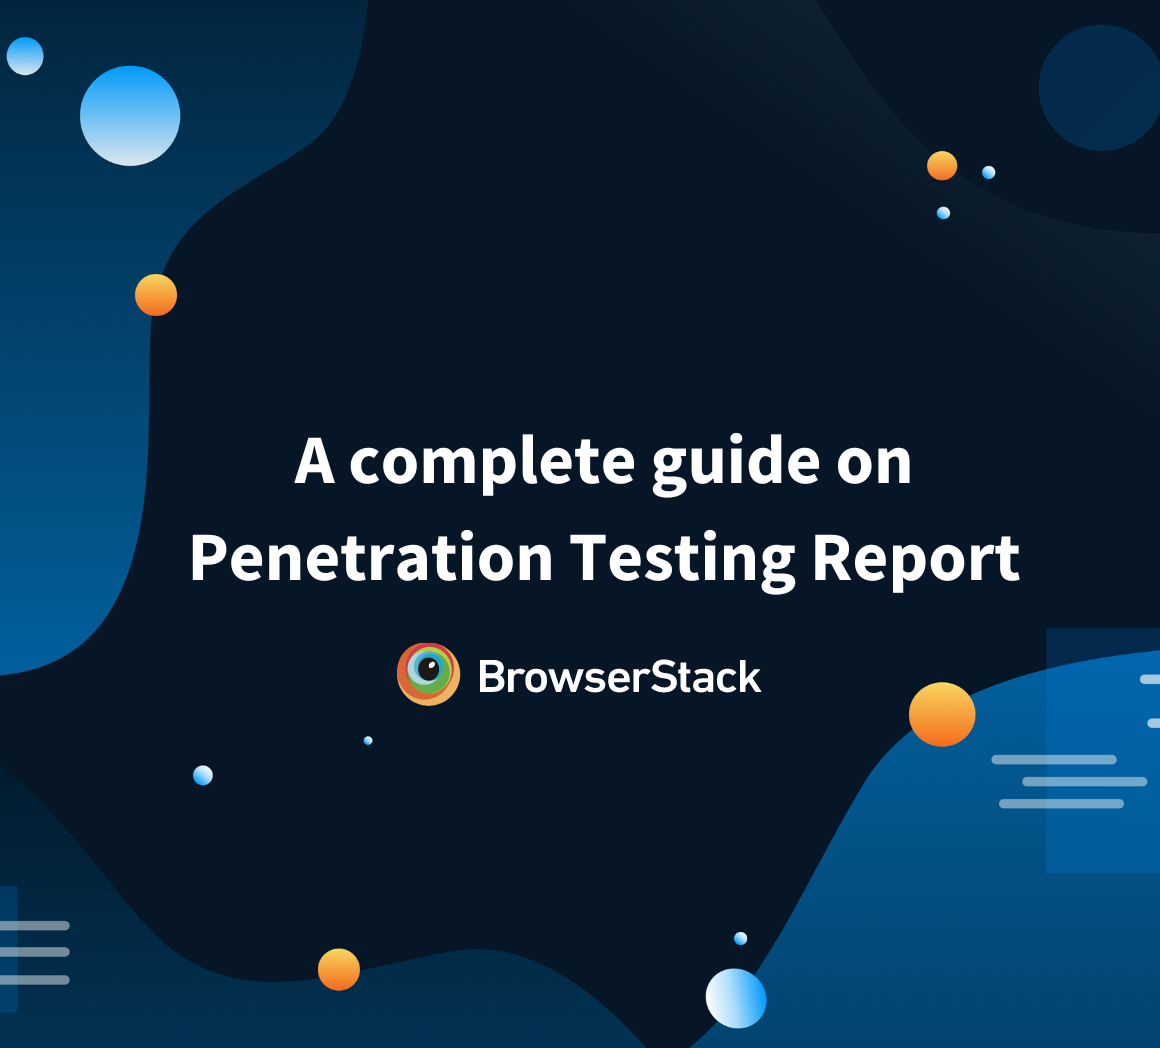 A complete guide on Penetration Testing Report